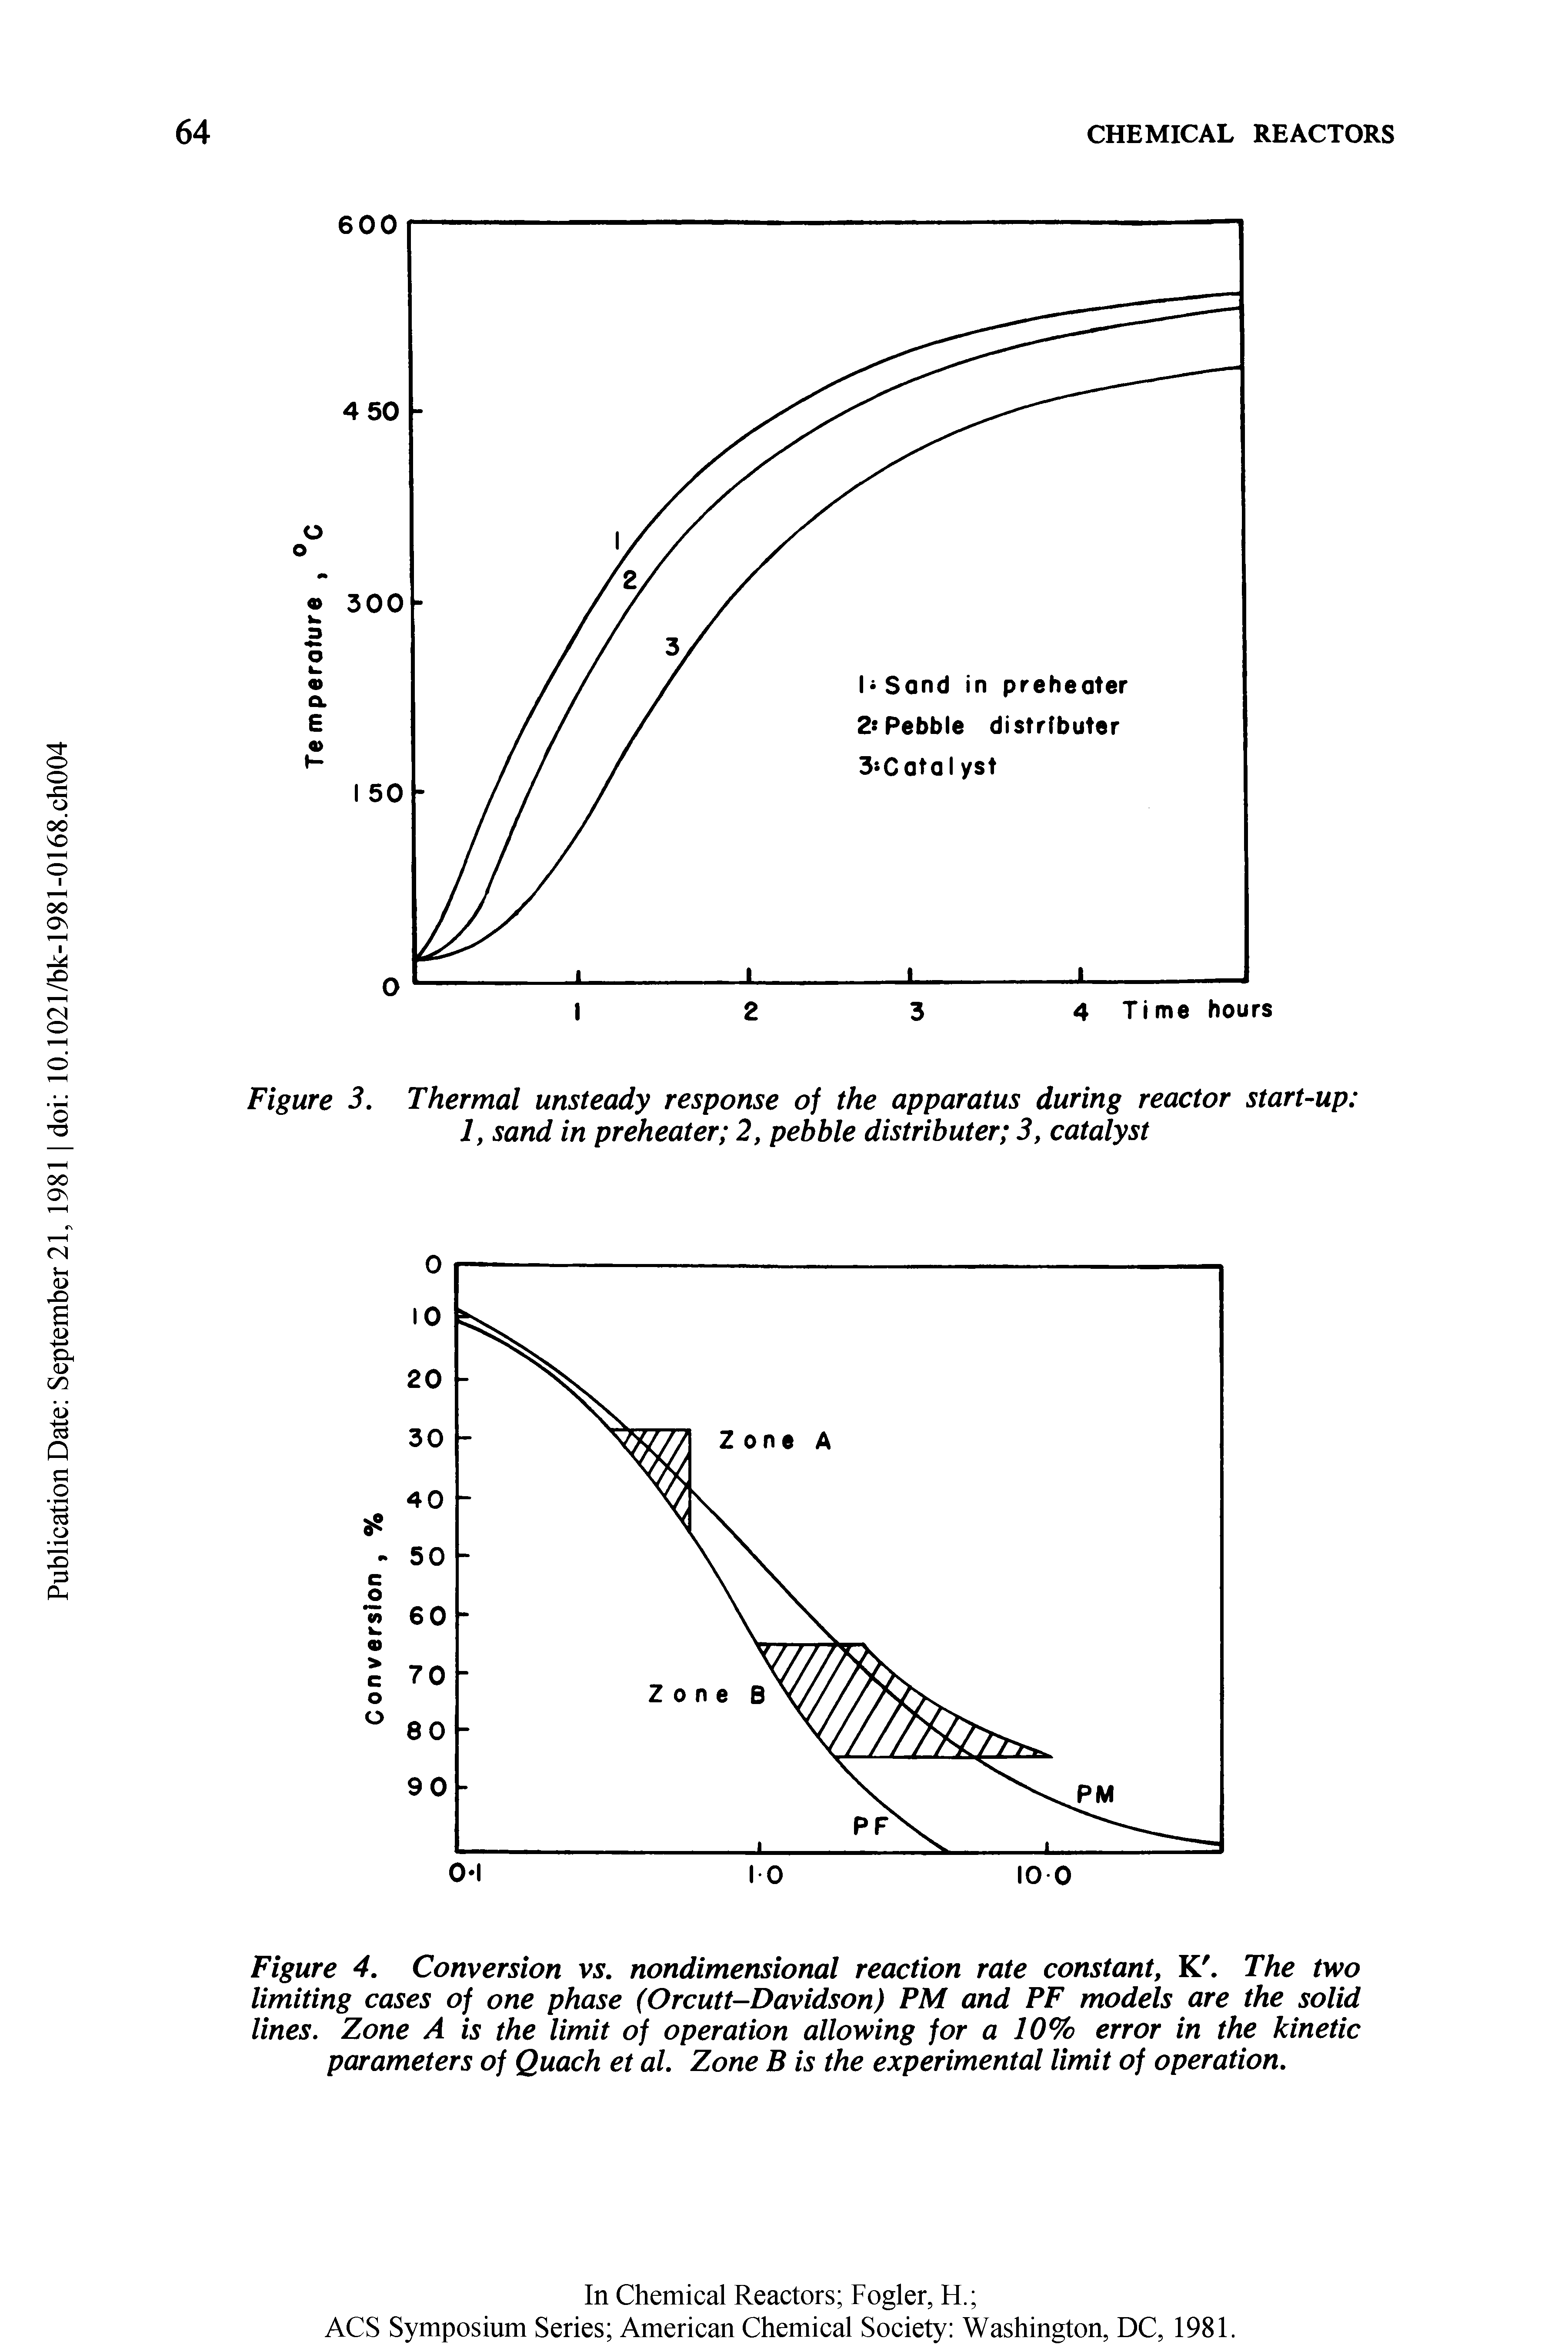 Figure 4. Conversion vs. nondimensional reaction rate constant, K. The two limiting cases of one phase (Orcutt-Davidson) PM and PF models are the solid lines. Zone A is the limit of operation allowing for a 10% error in the kinetic parameters of Quach et al. Zone B is the experimental limit of operation.